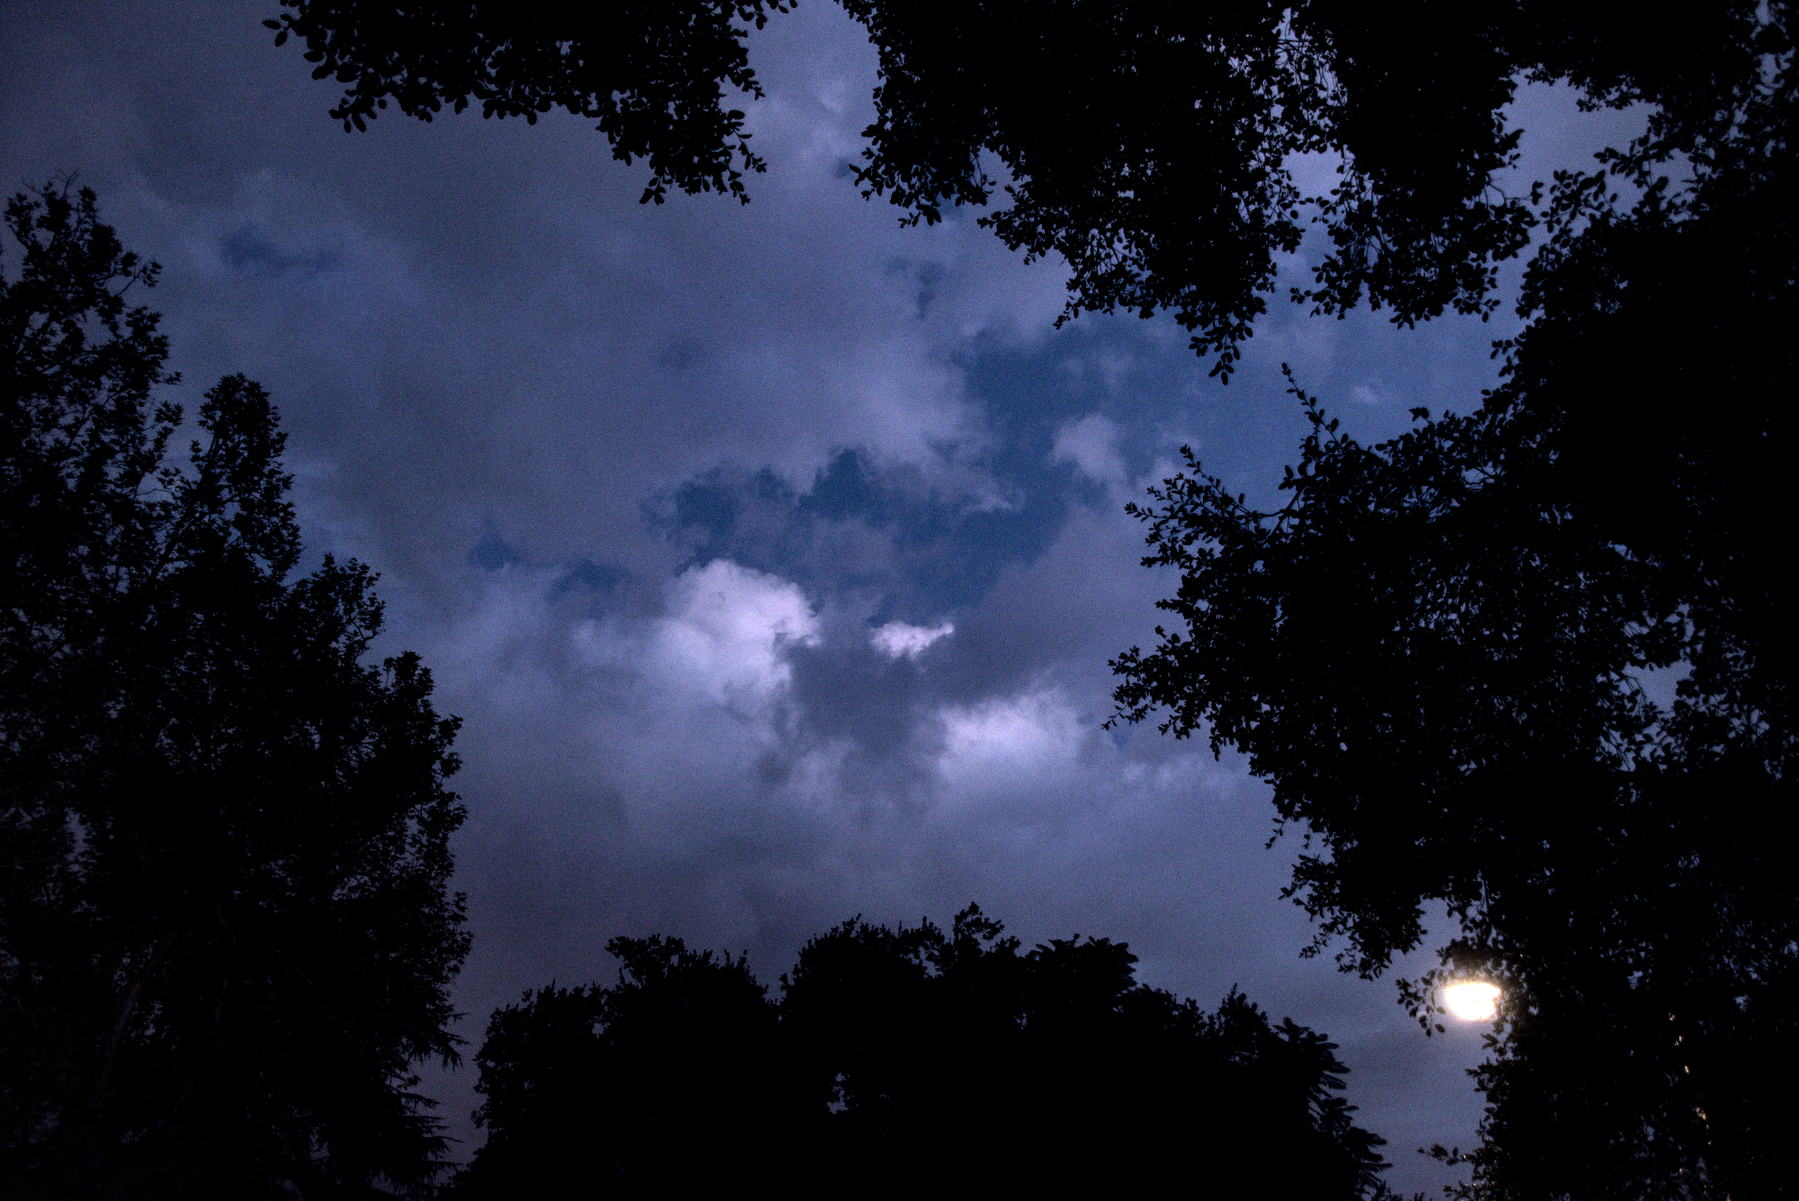 Tree silhouettes against a dark blue evening sky, and a street lamp.